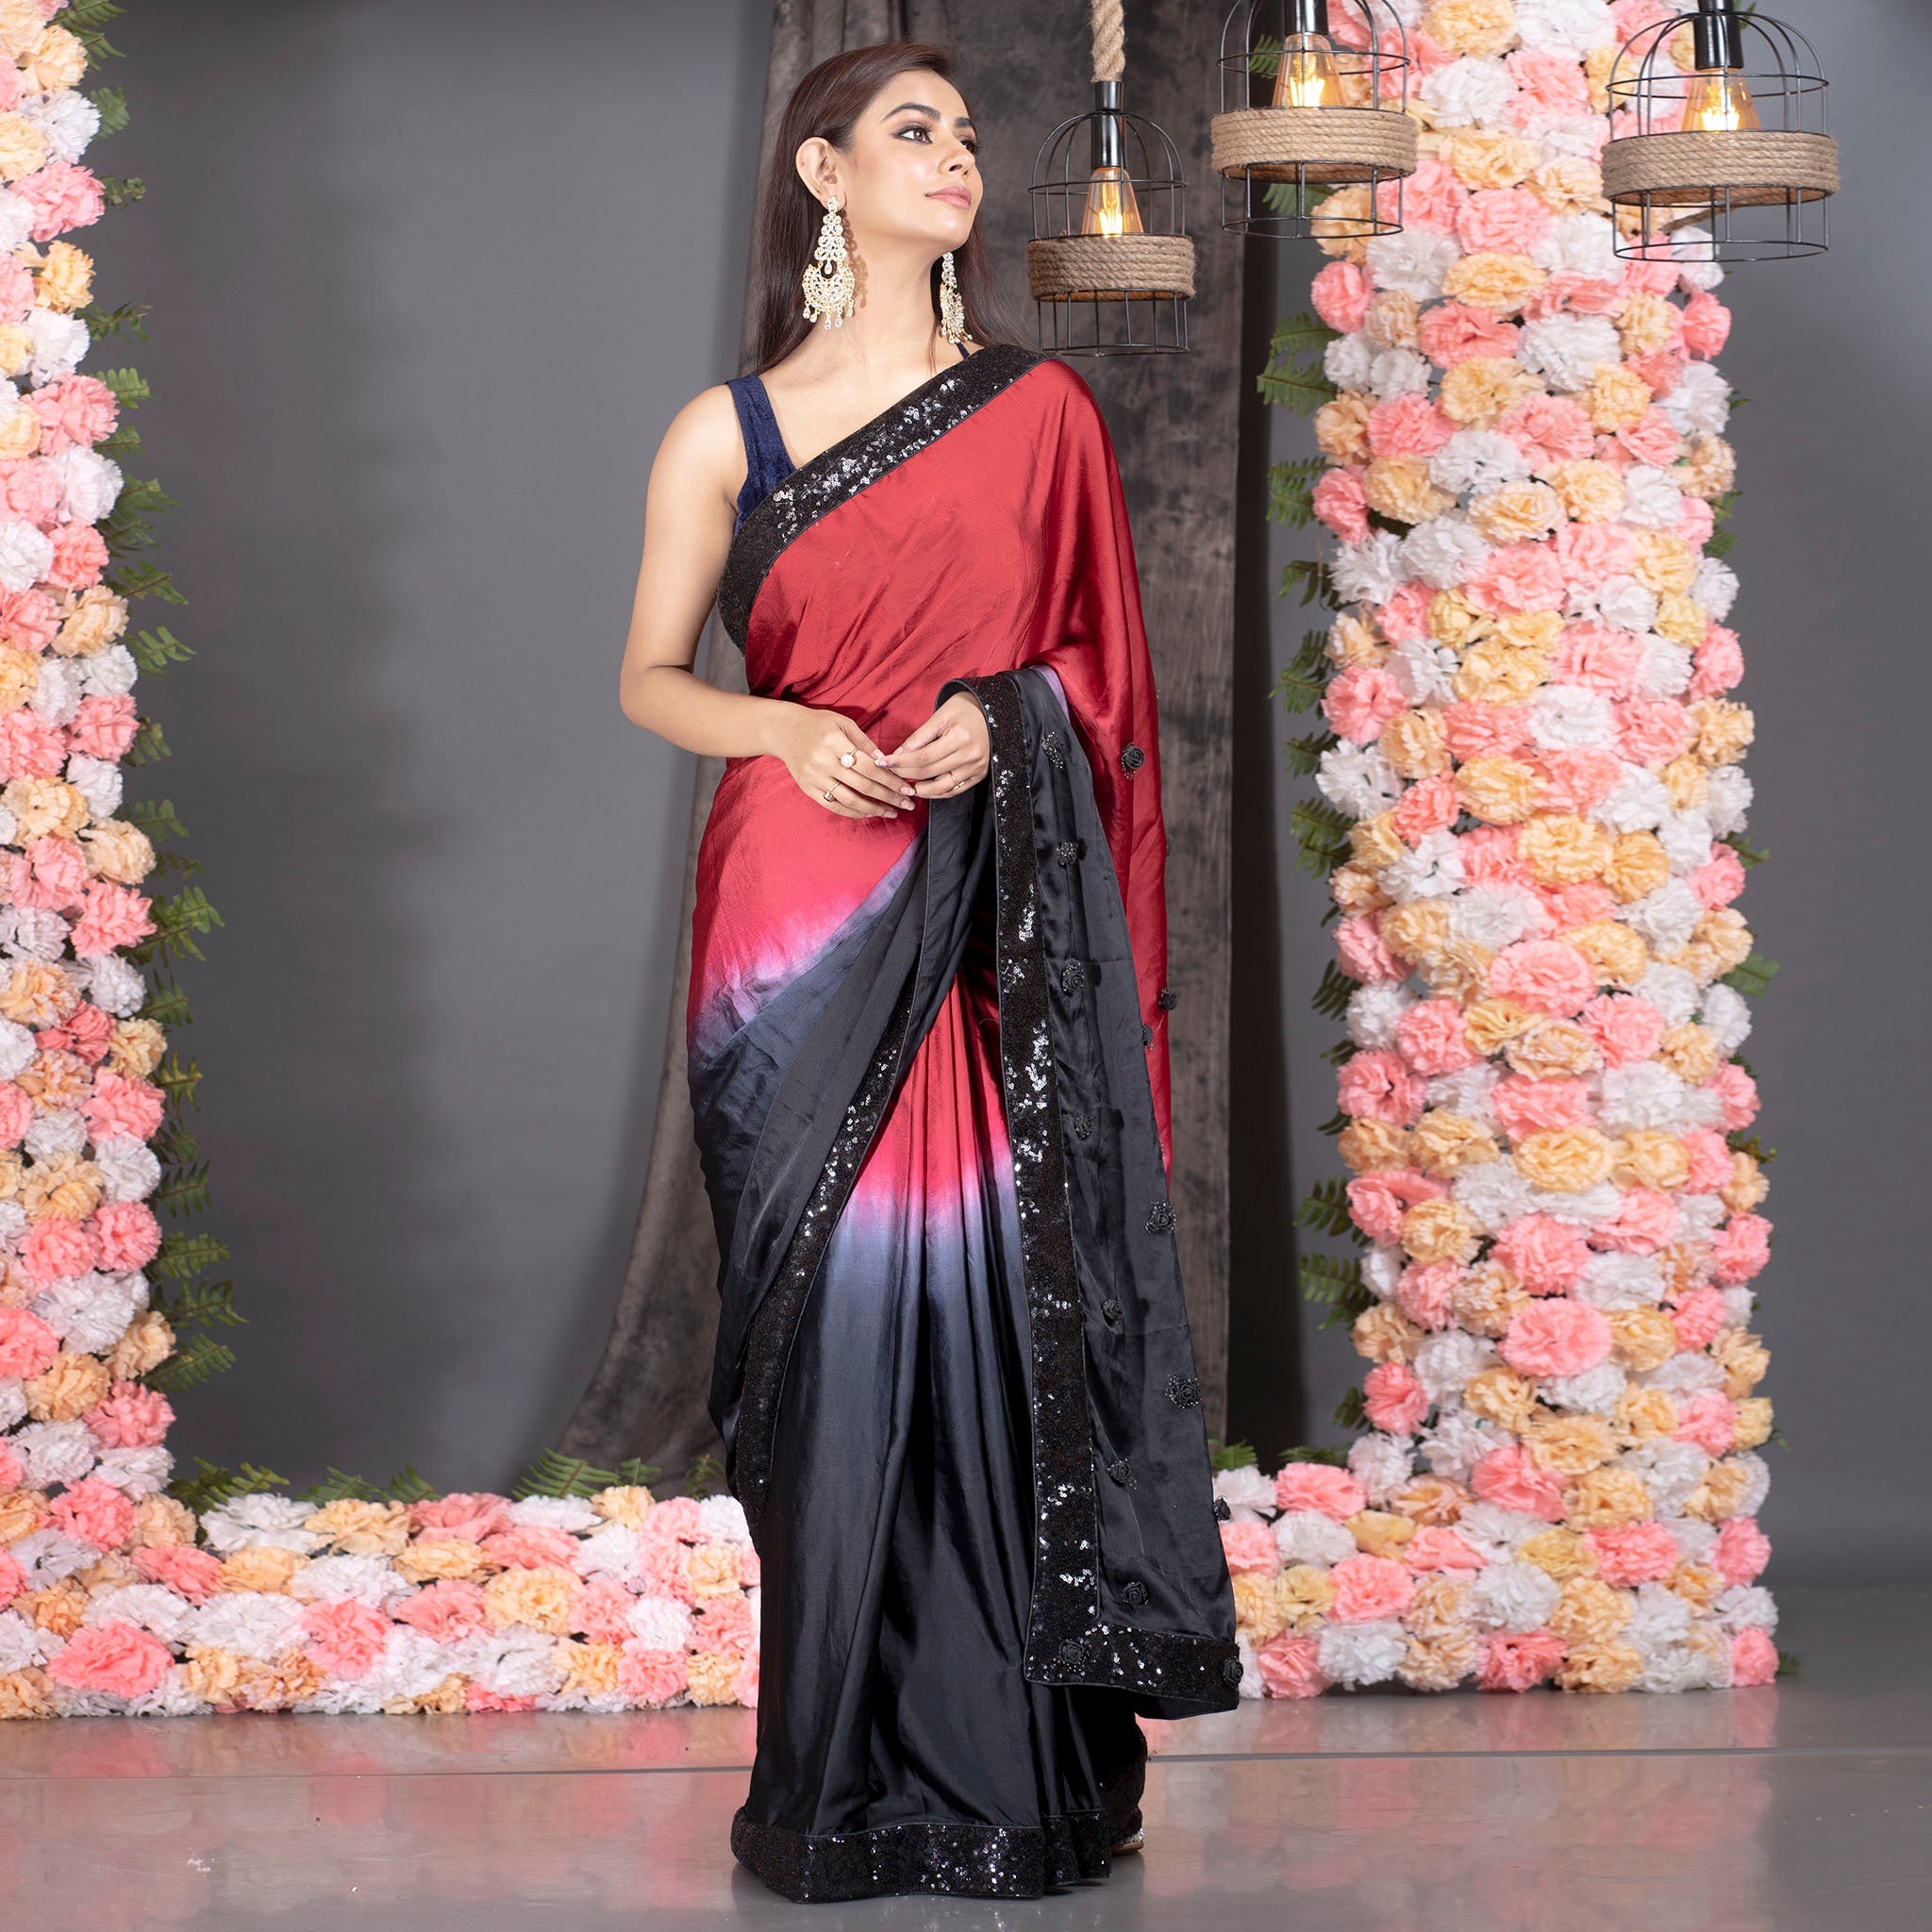 Women's Red And Black Ombre Satin Saree With Sequin Lace Border And Handmade Rosette Pallu - Boveee